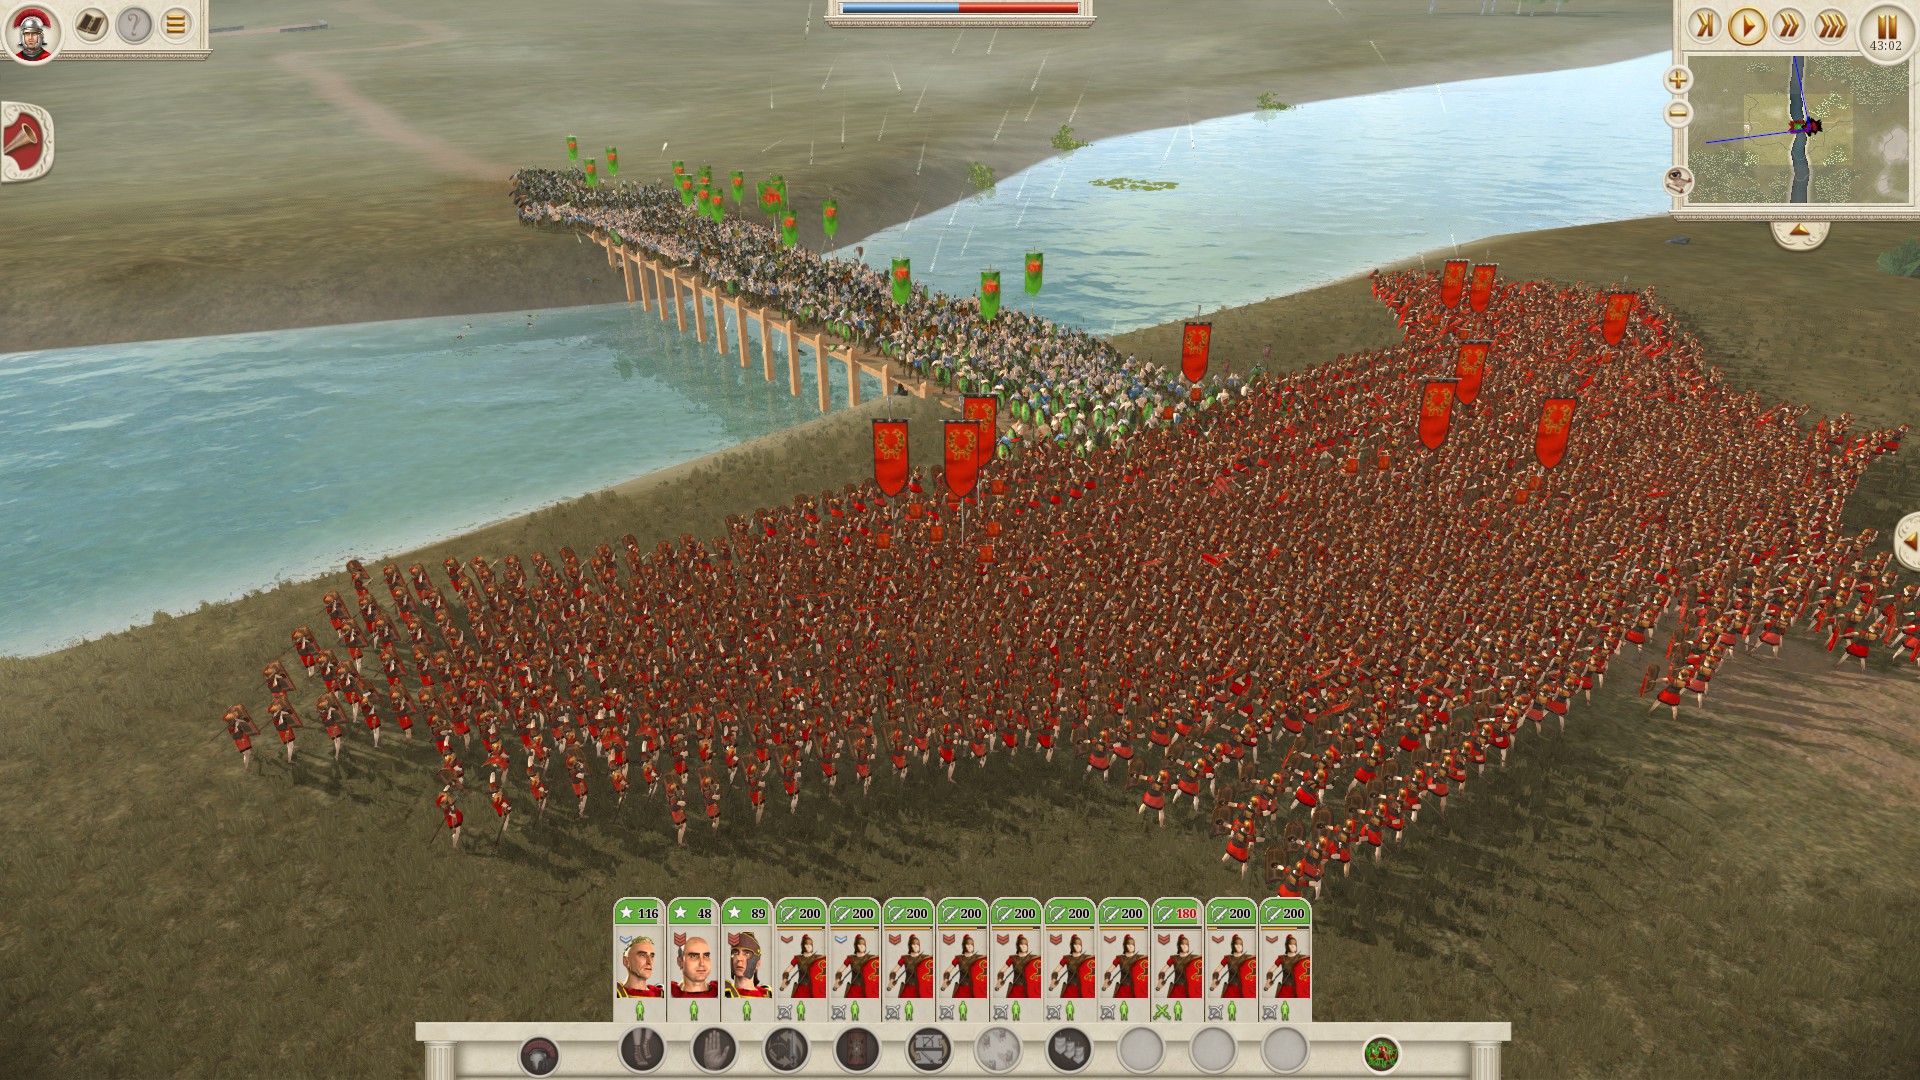 marian reforms rome total war